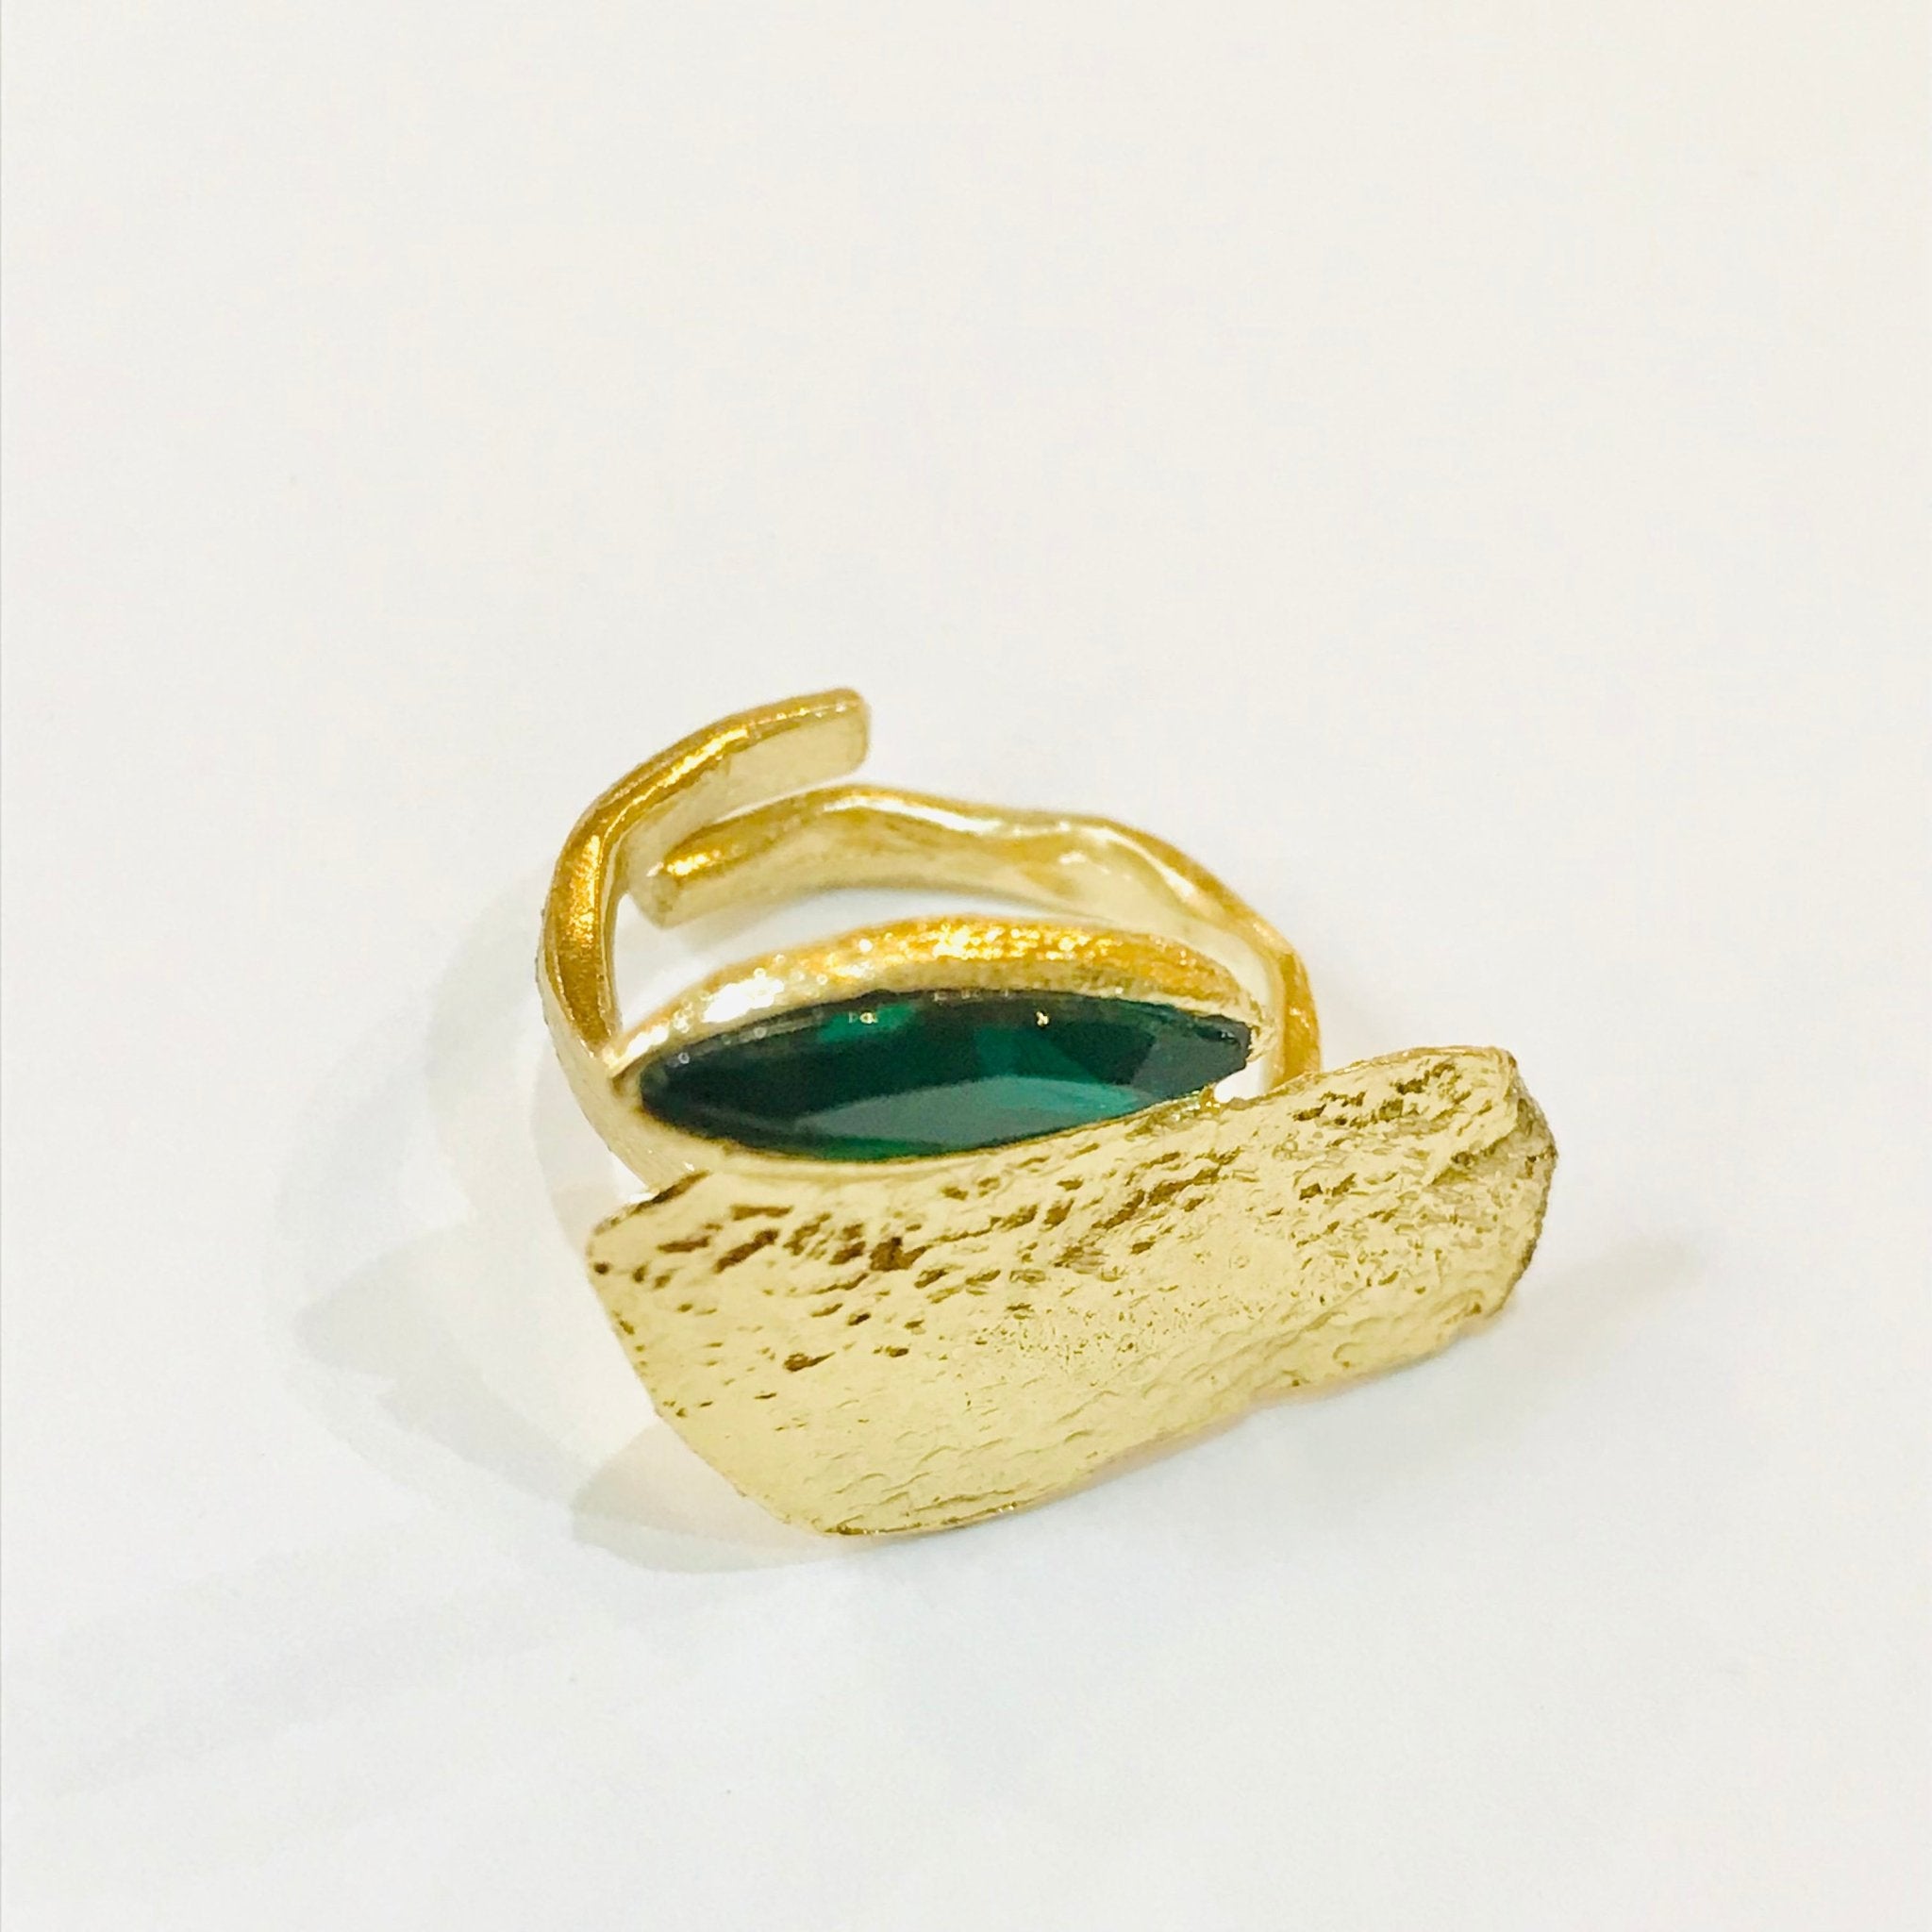 Bronze and Emerald Ring - The Nancy Smillie Shop - Art, Jewellery & Designer Gifts Glasgow